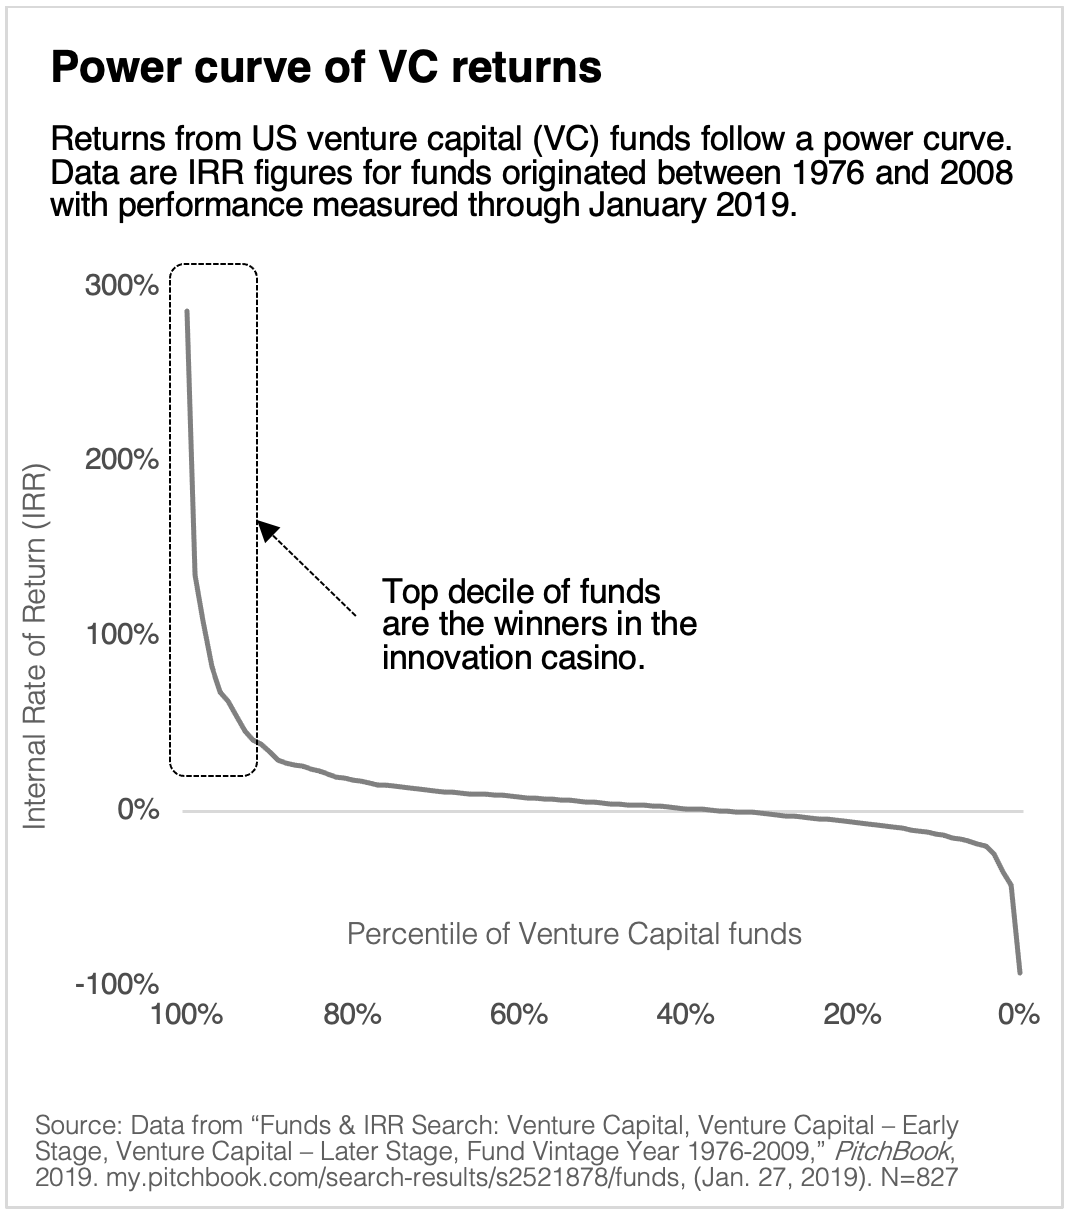 Graph of power curve of VC returns (US) shows the rewards or perils of innovation funding